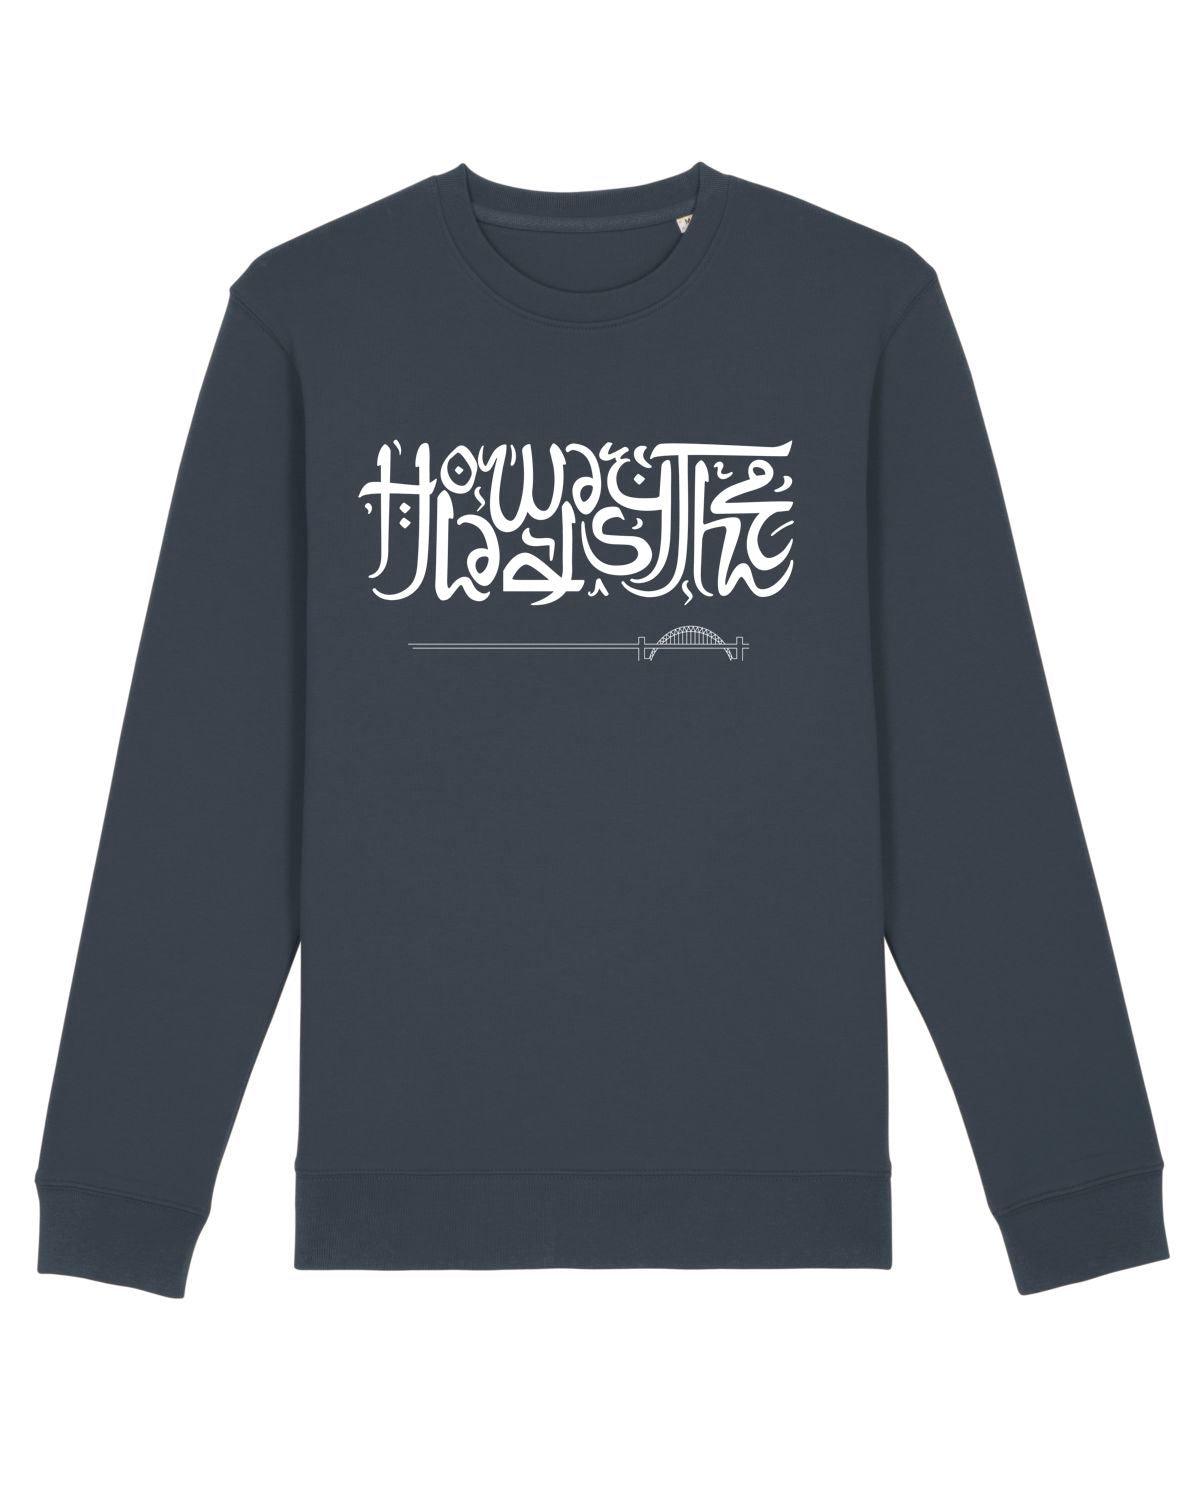 HOWAY THE LADS: Sweatshirt from NUFC East Stand 65 (4 Colour Options) - SOUND IS COLOUR